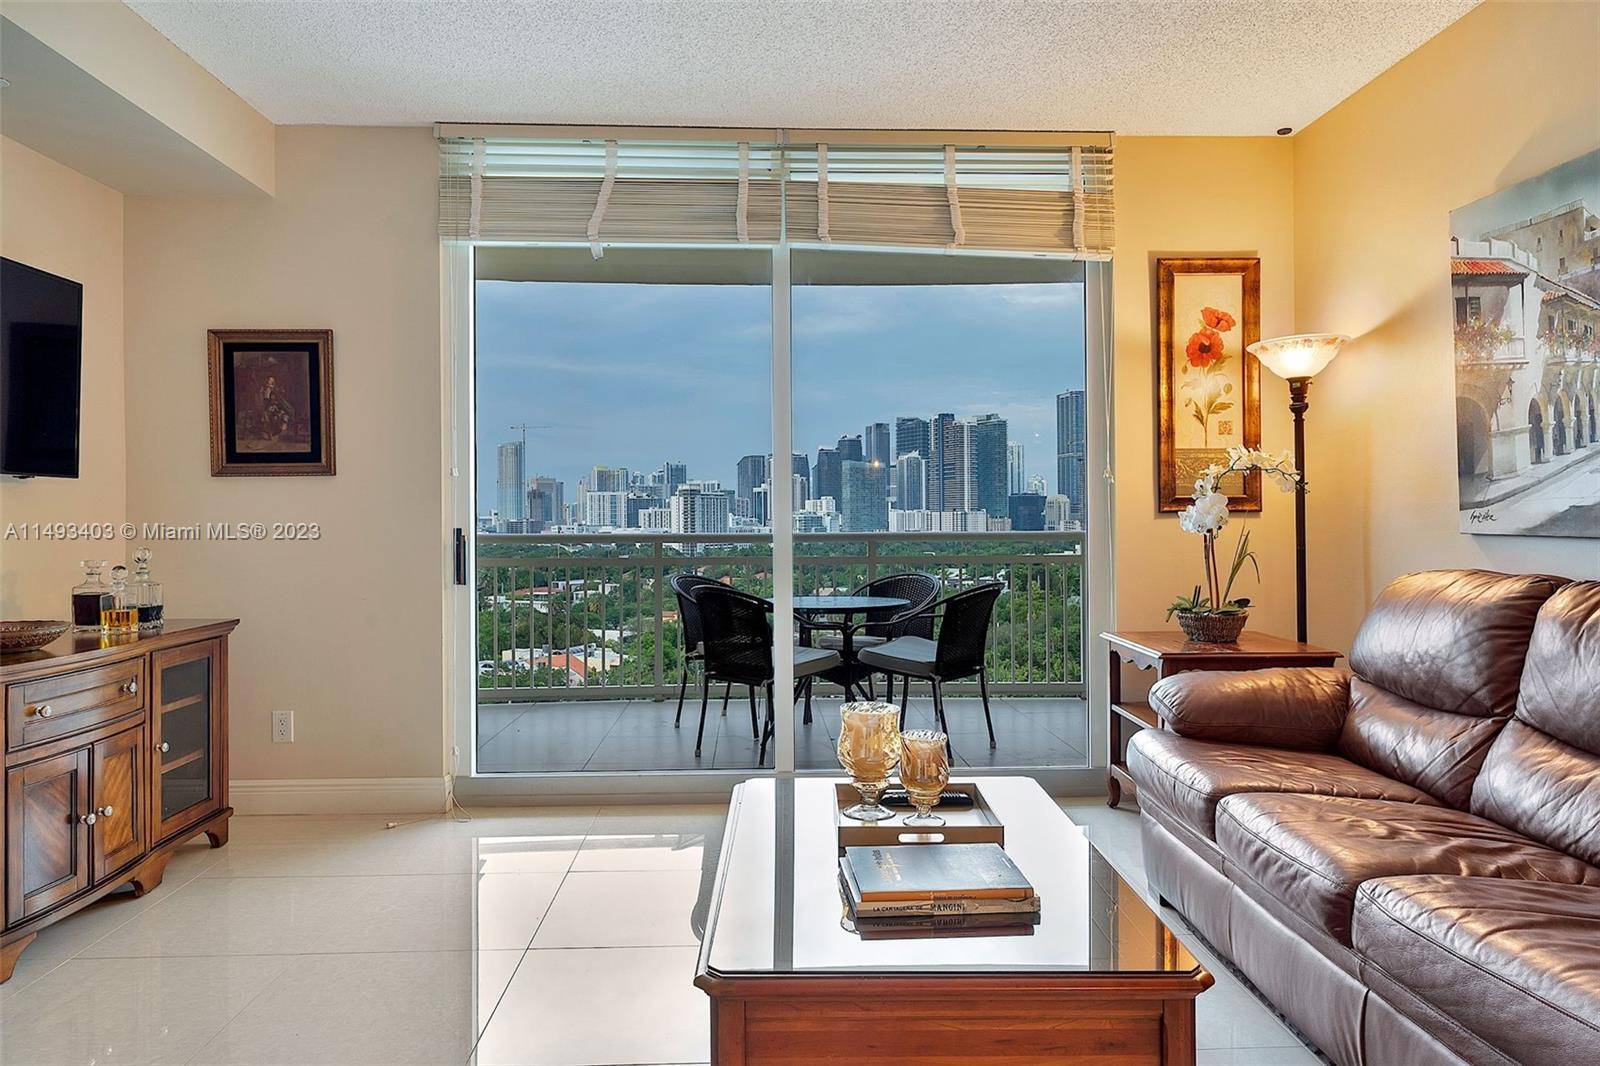 Spectacular, unobstructed views of Brickell and Biscayne Bay from beautiful, bright, fully furnished 2bed 2 bath, 1 assigned parking space located in Metropolitan Condo in South Brickell.